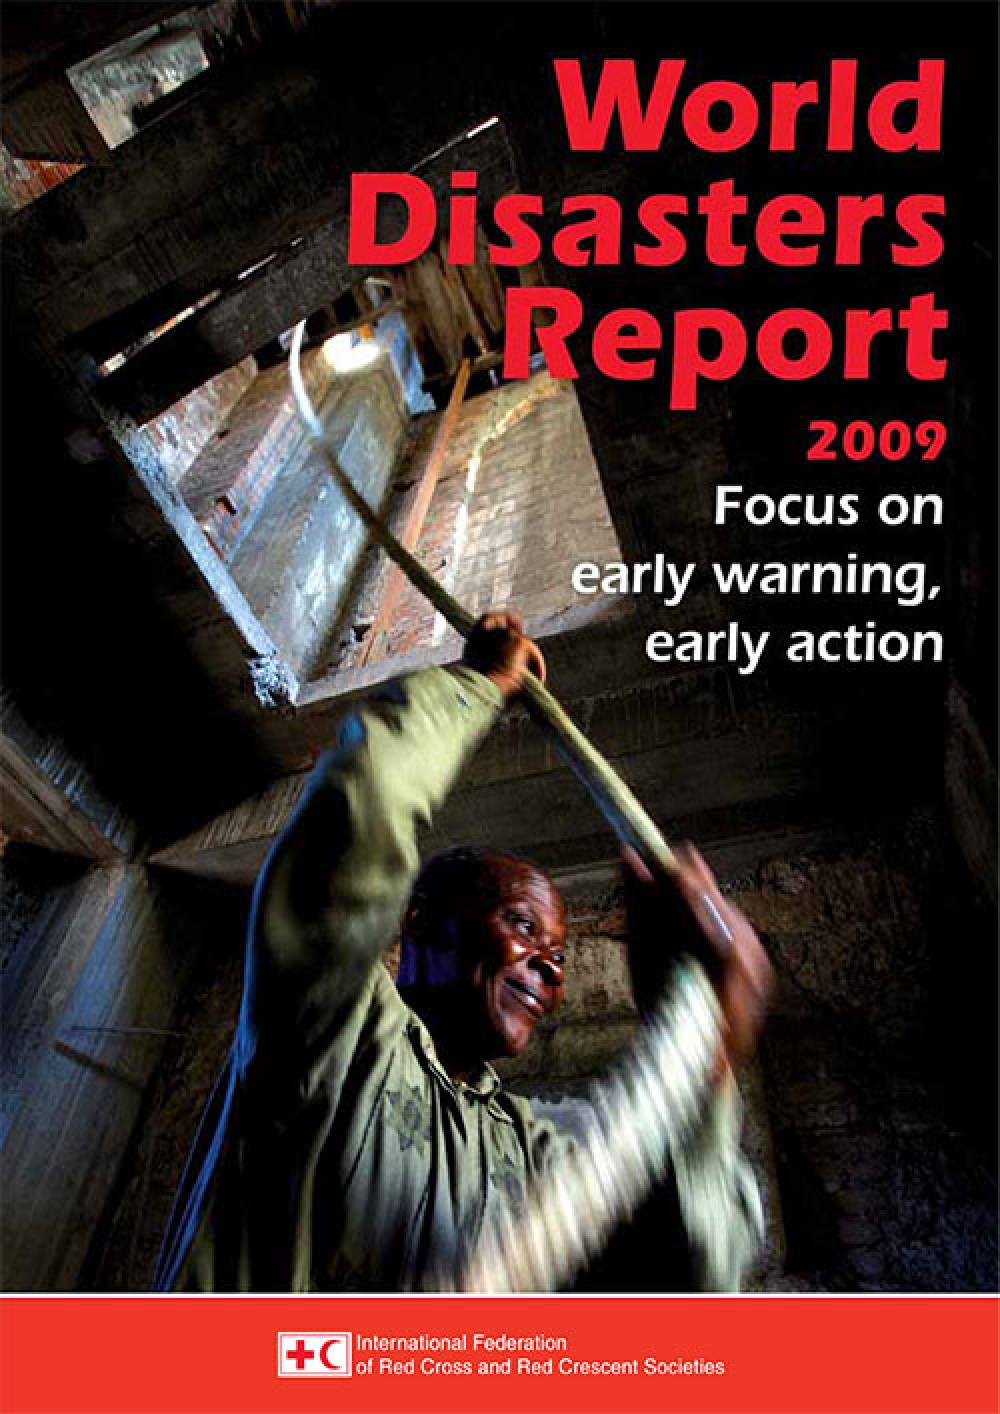 World Disaster Report 2009